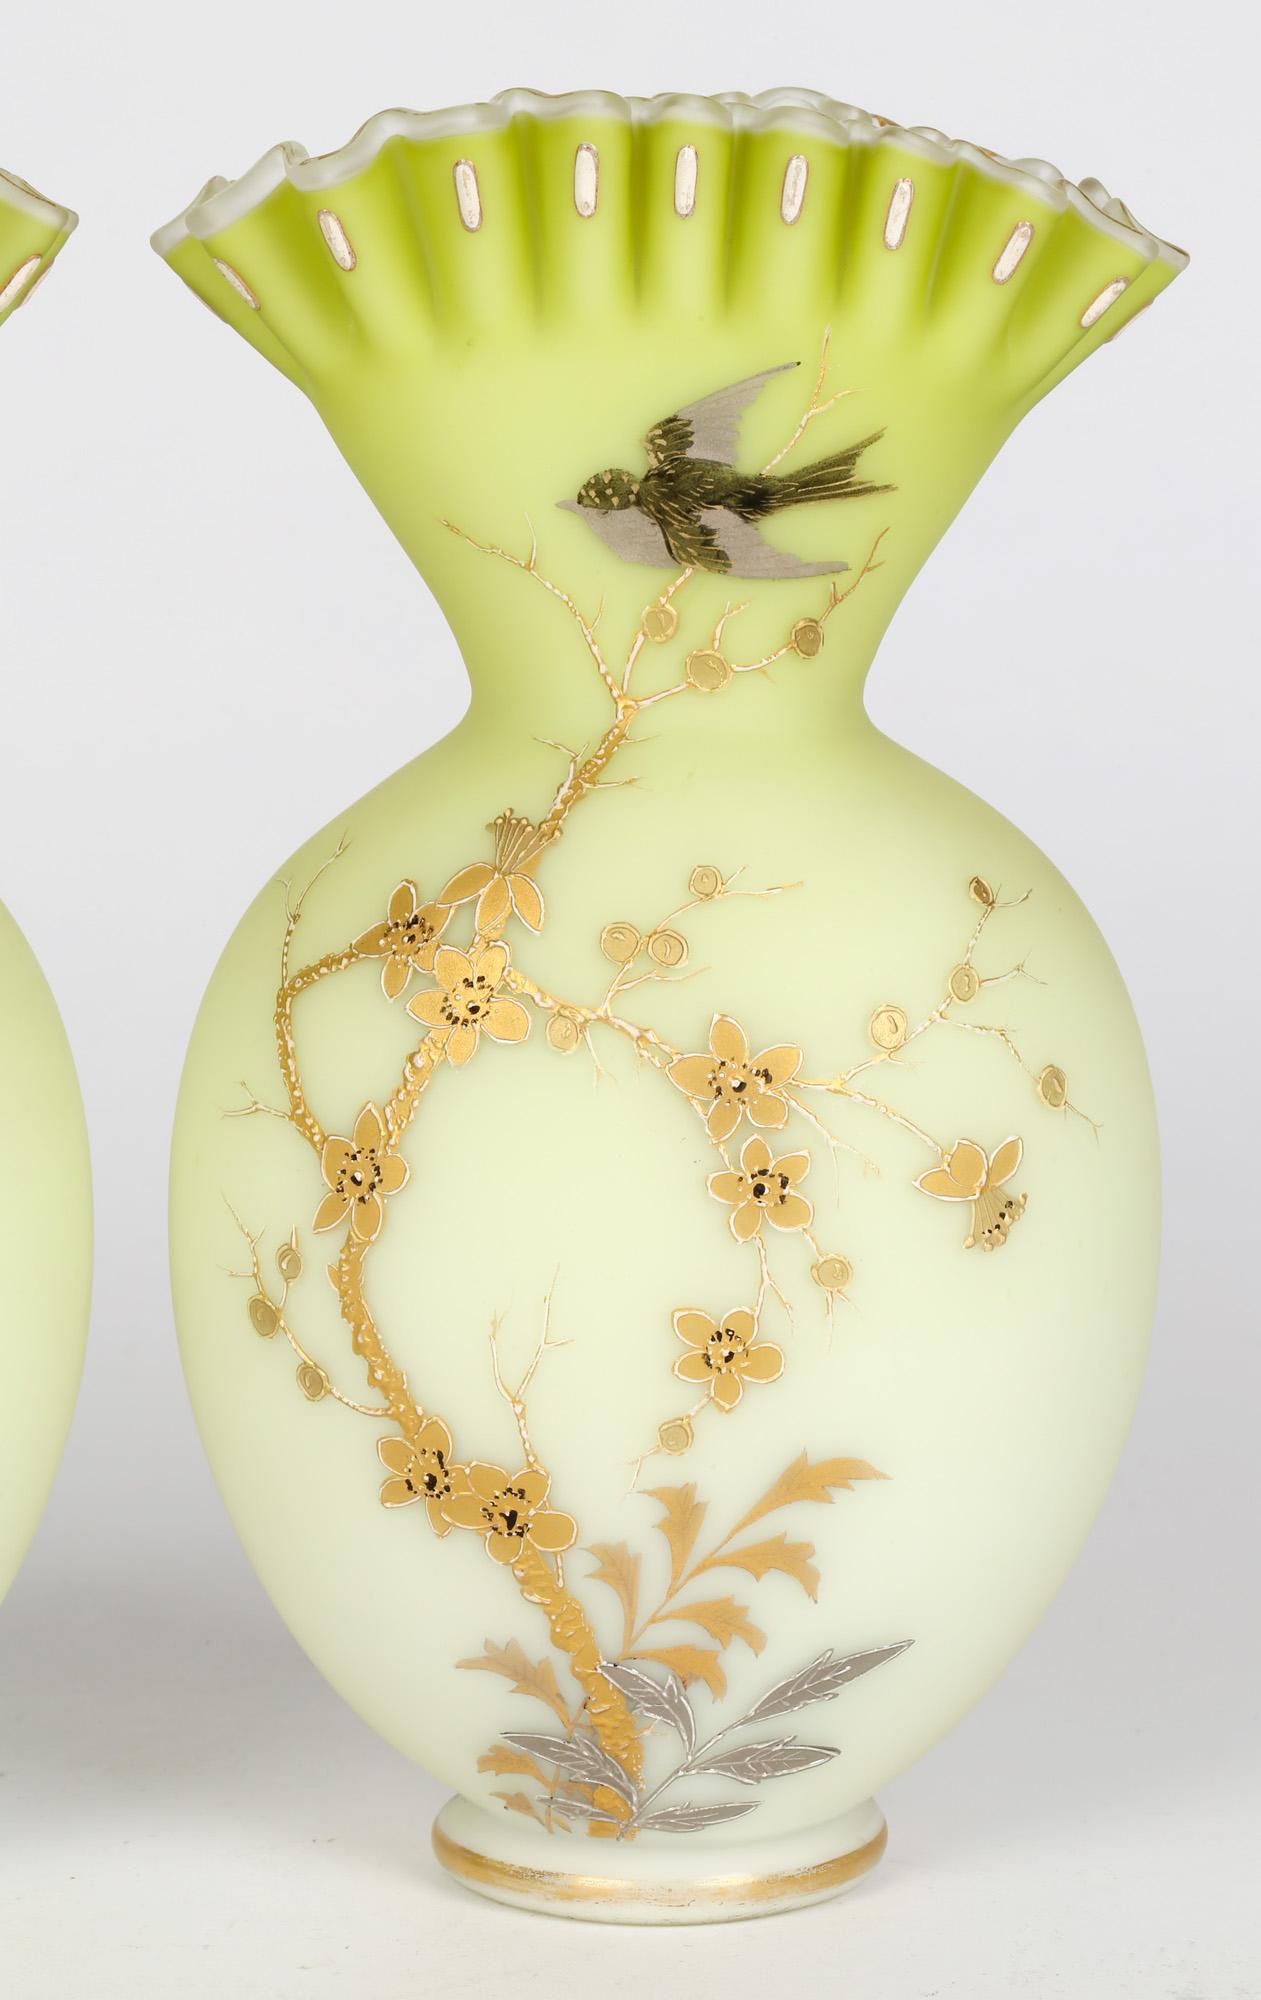 A very fine and stunning pair late Victorian satin green glass vases with floral and bird designs attributed to Jules Barbe for Thomas Webb and dating to the 19th Century. The hand blown vases are of rounded flask shape with fan shaped tops with